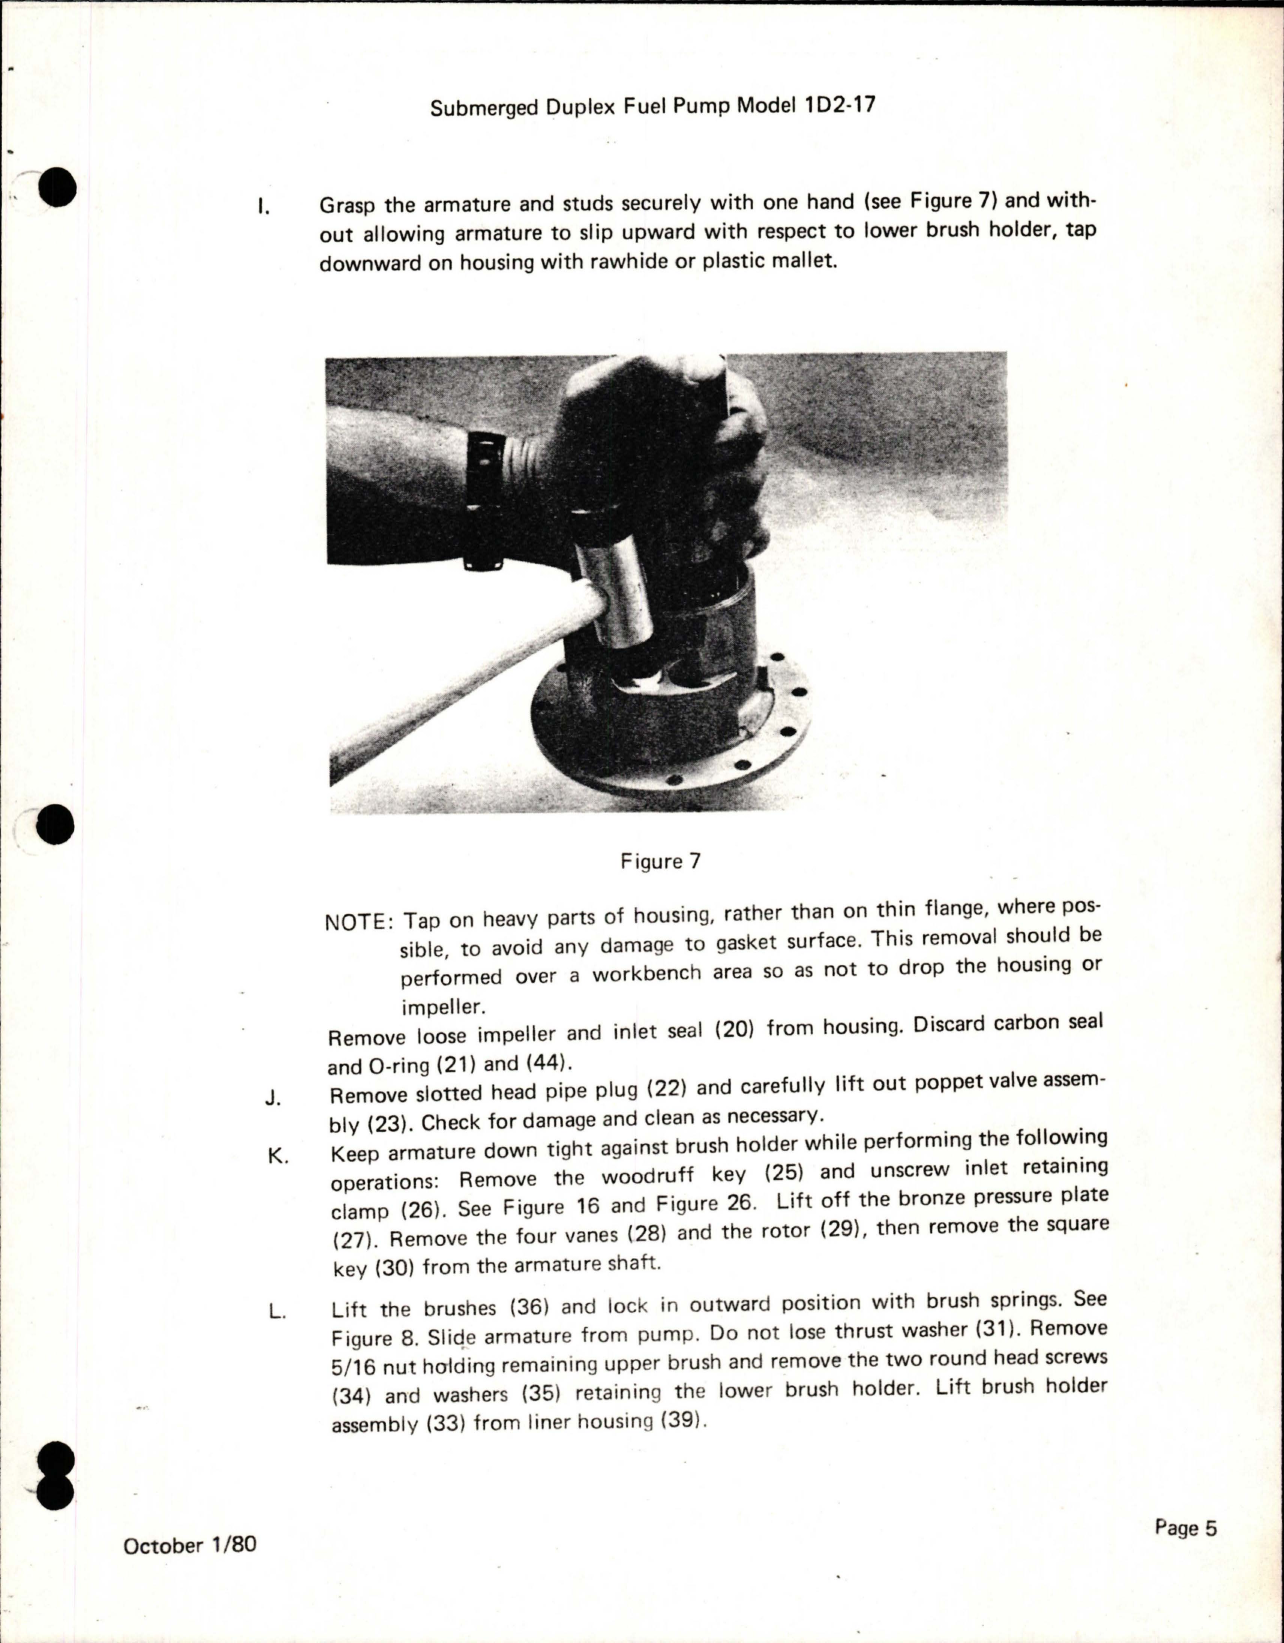 Sample page 7 from AirCorps Library document: Overhaul Instructions with Parts Catalog for Submerged Duplex Fuel Pump - Model 1D2-17 (Parker